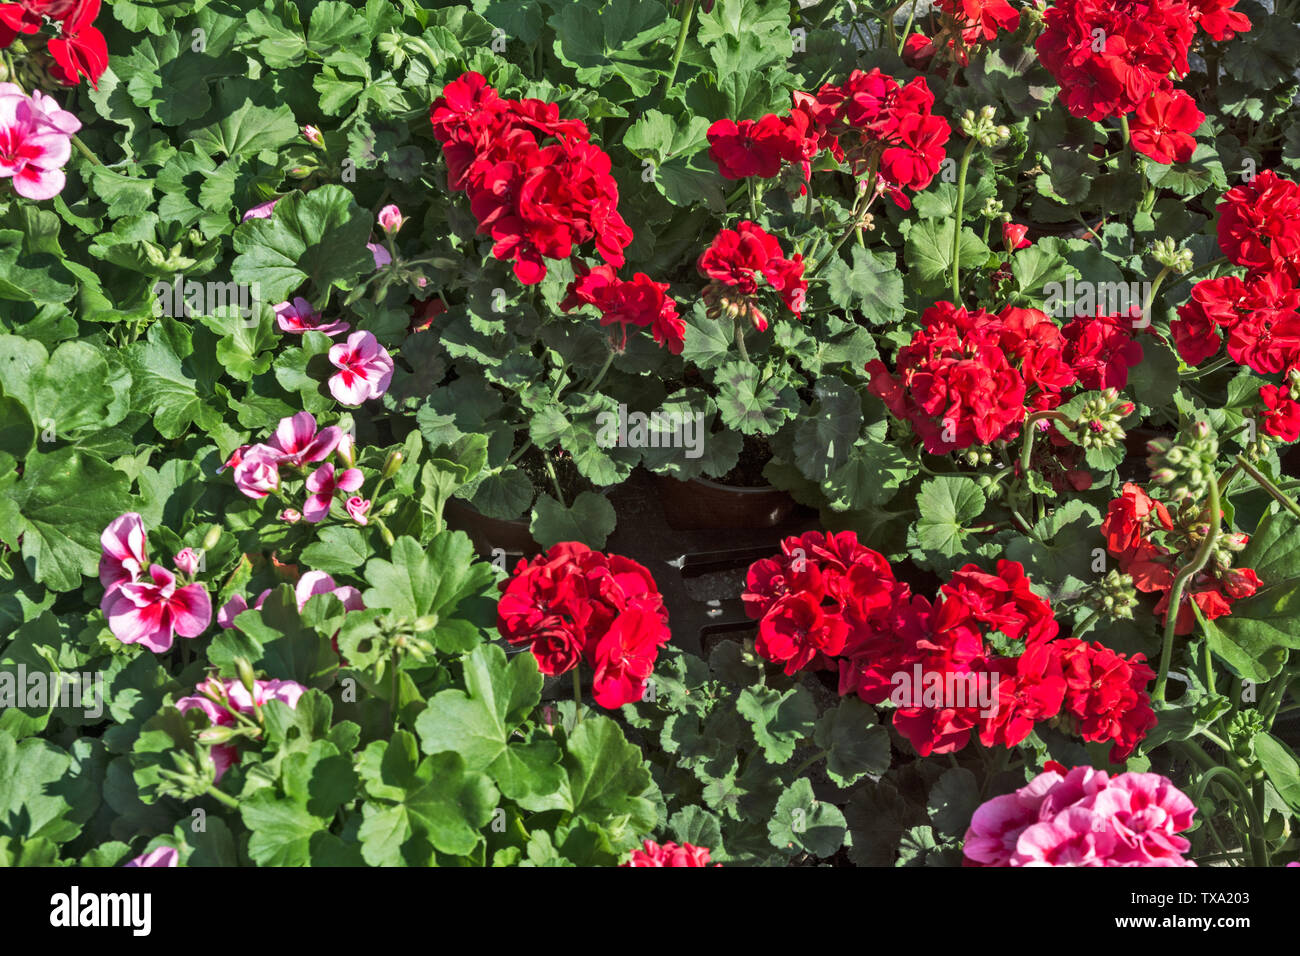 In the market of flowers beautiful red geraniums awaiting sale. Stock Photo